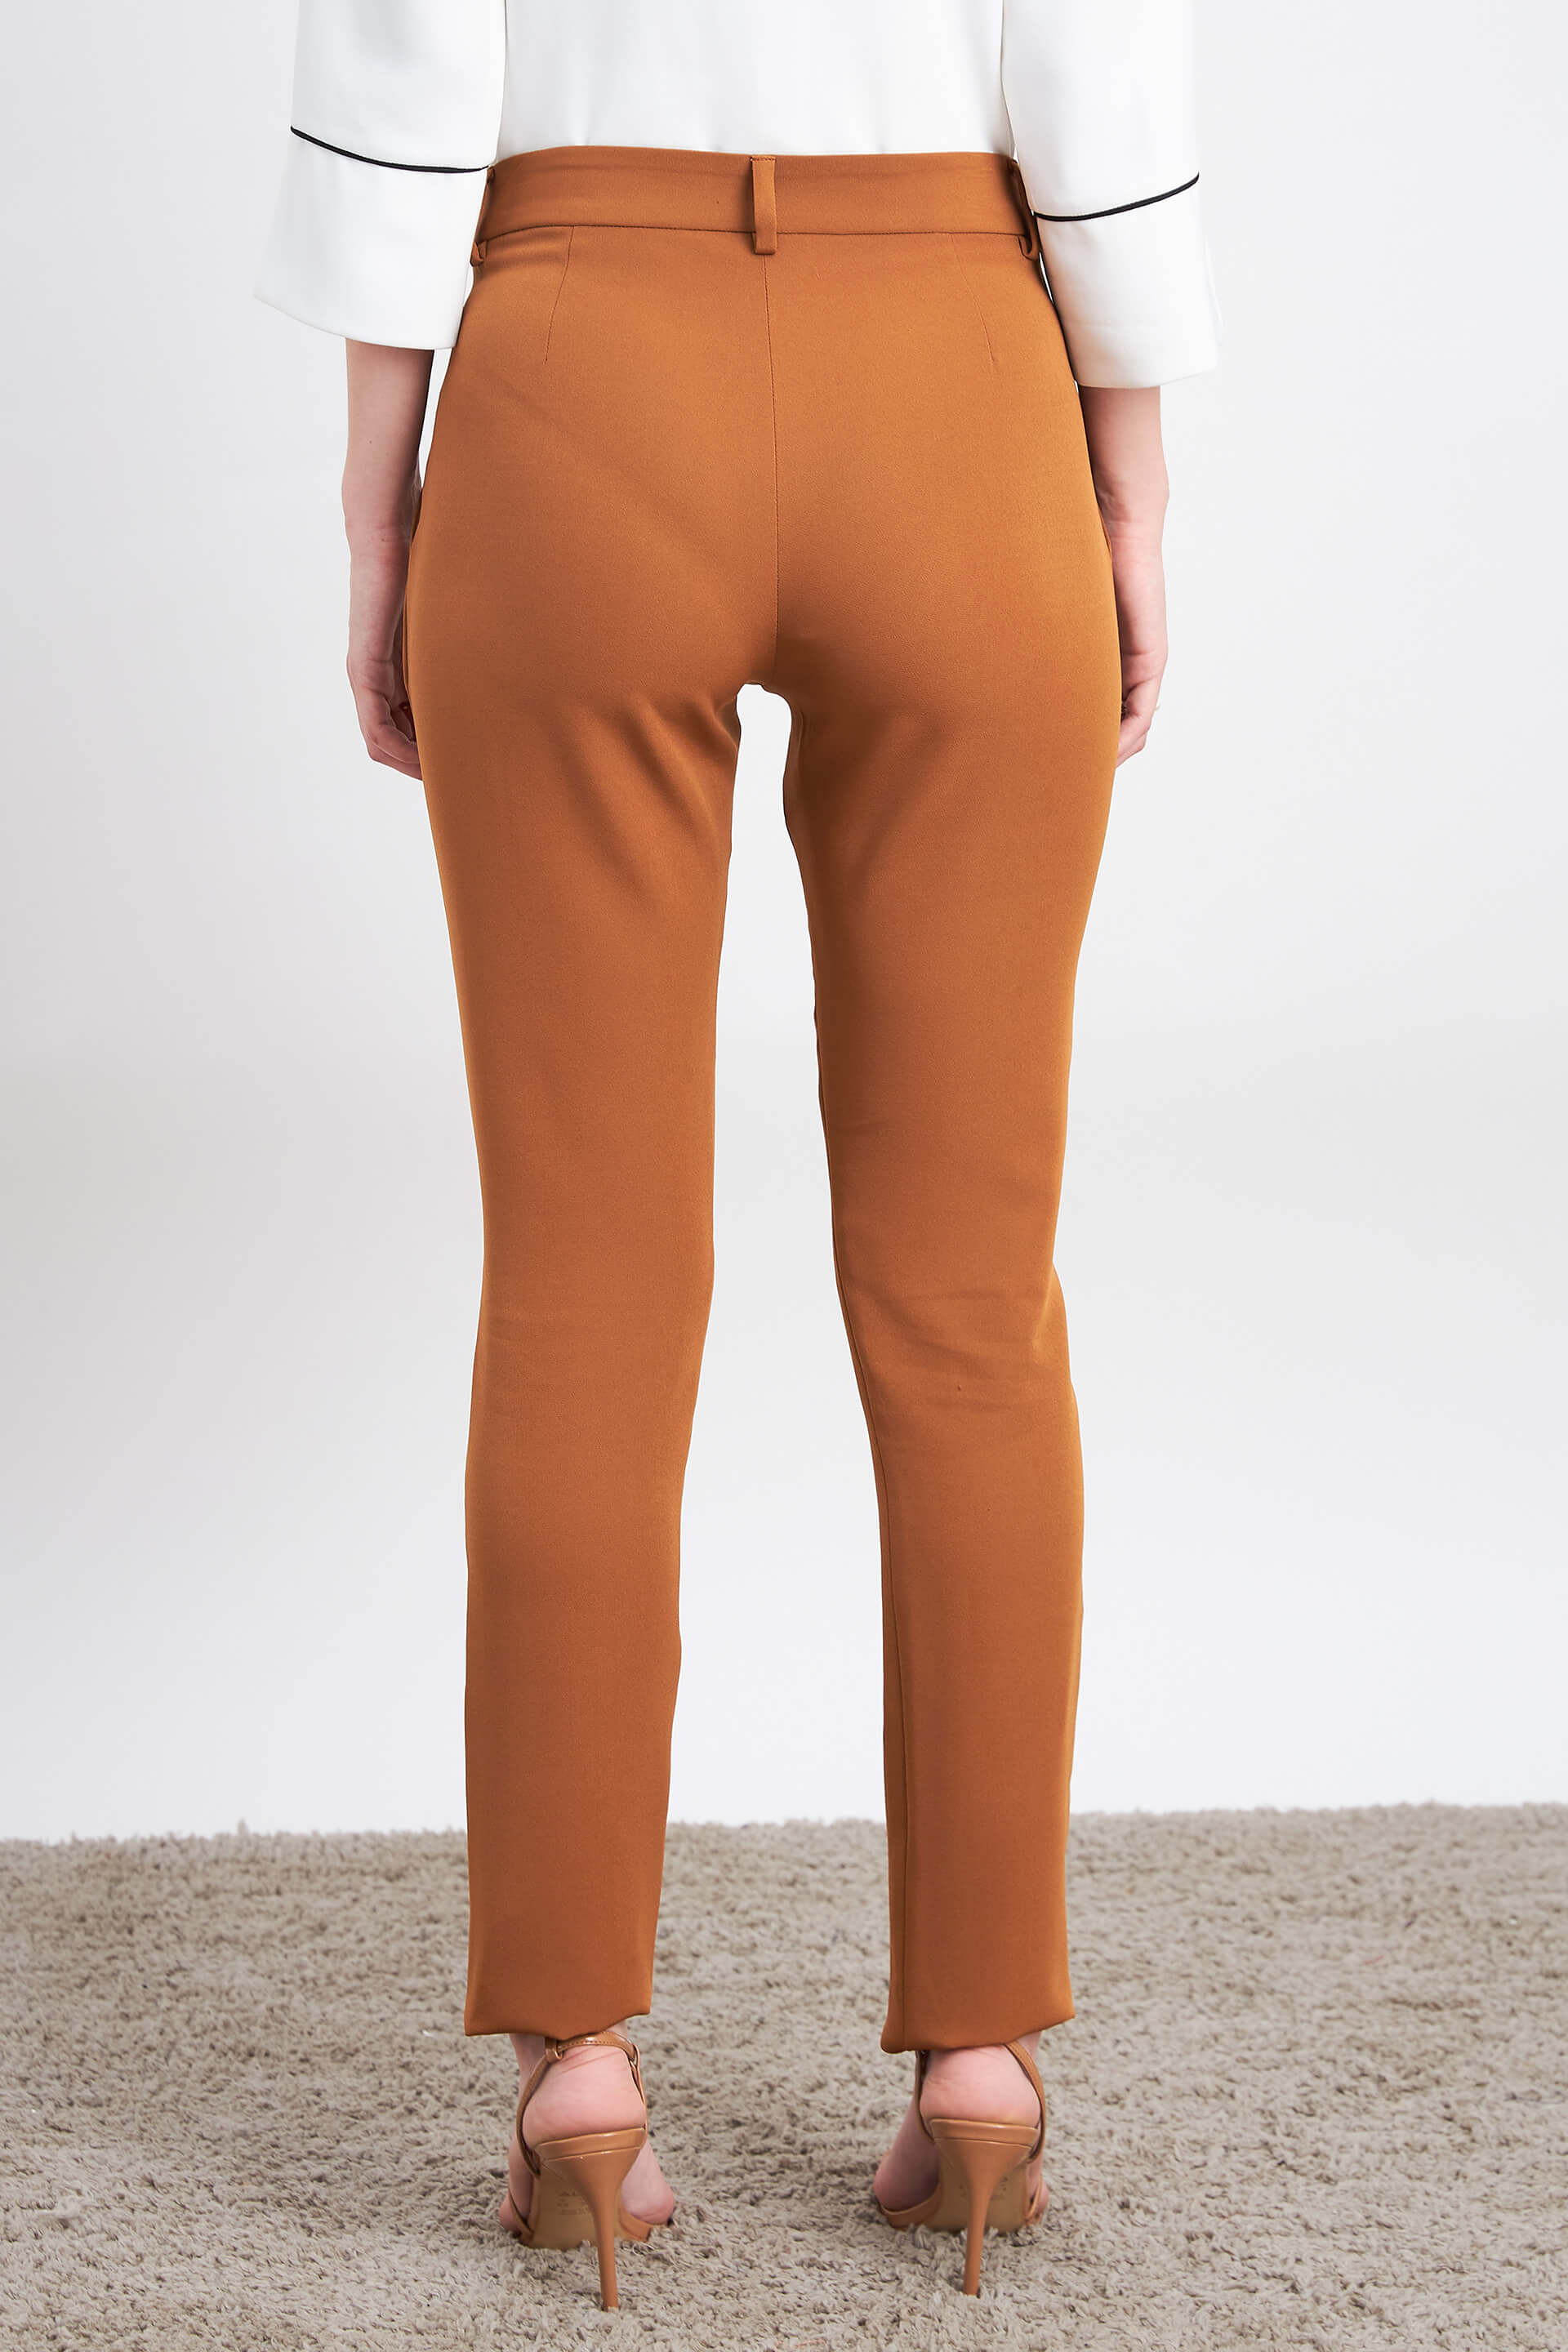 Earnest Mid To High Rise Pants - Tan Brown